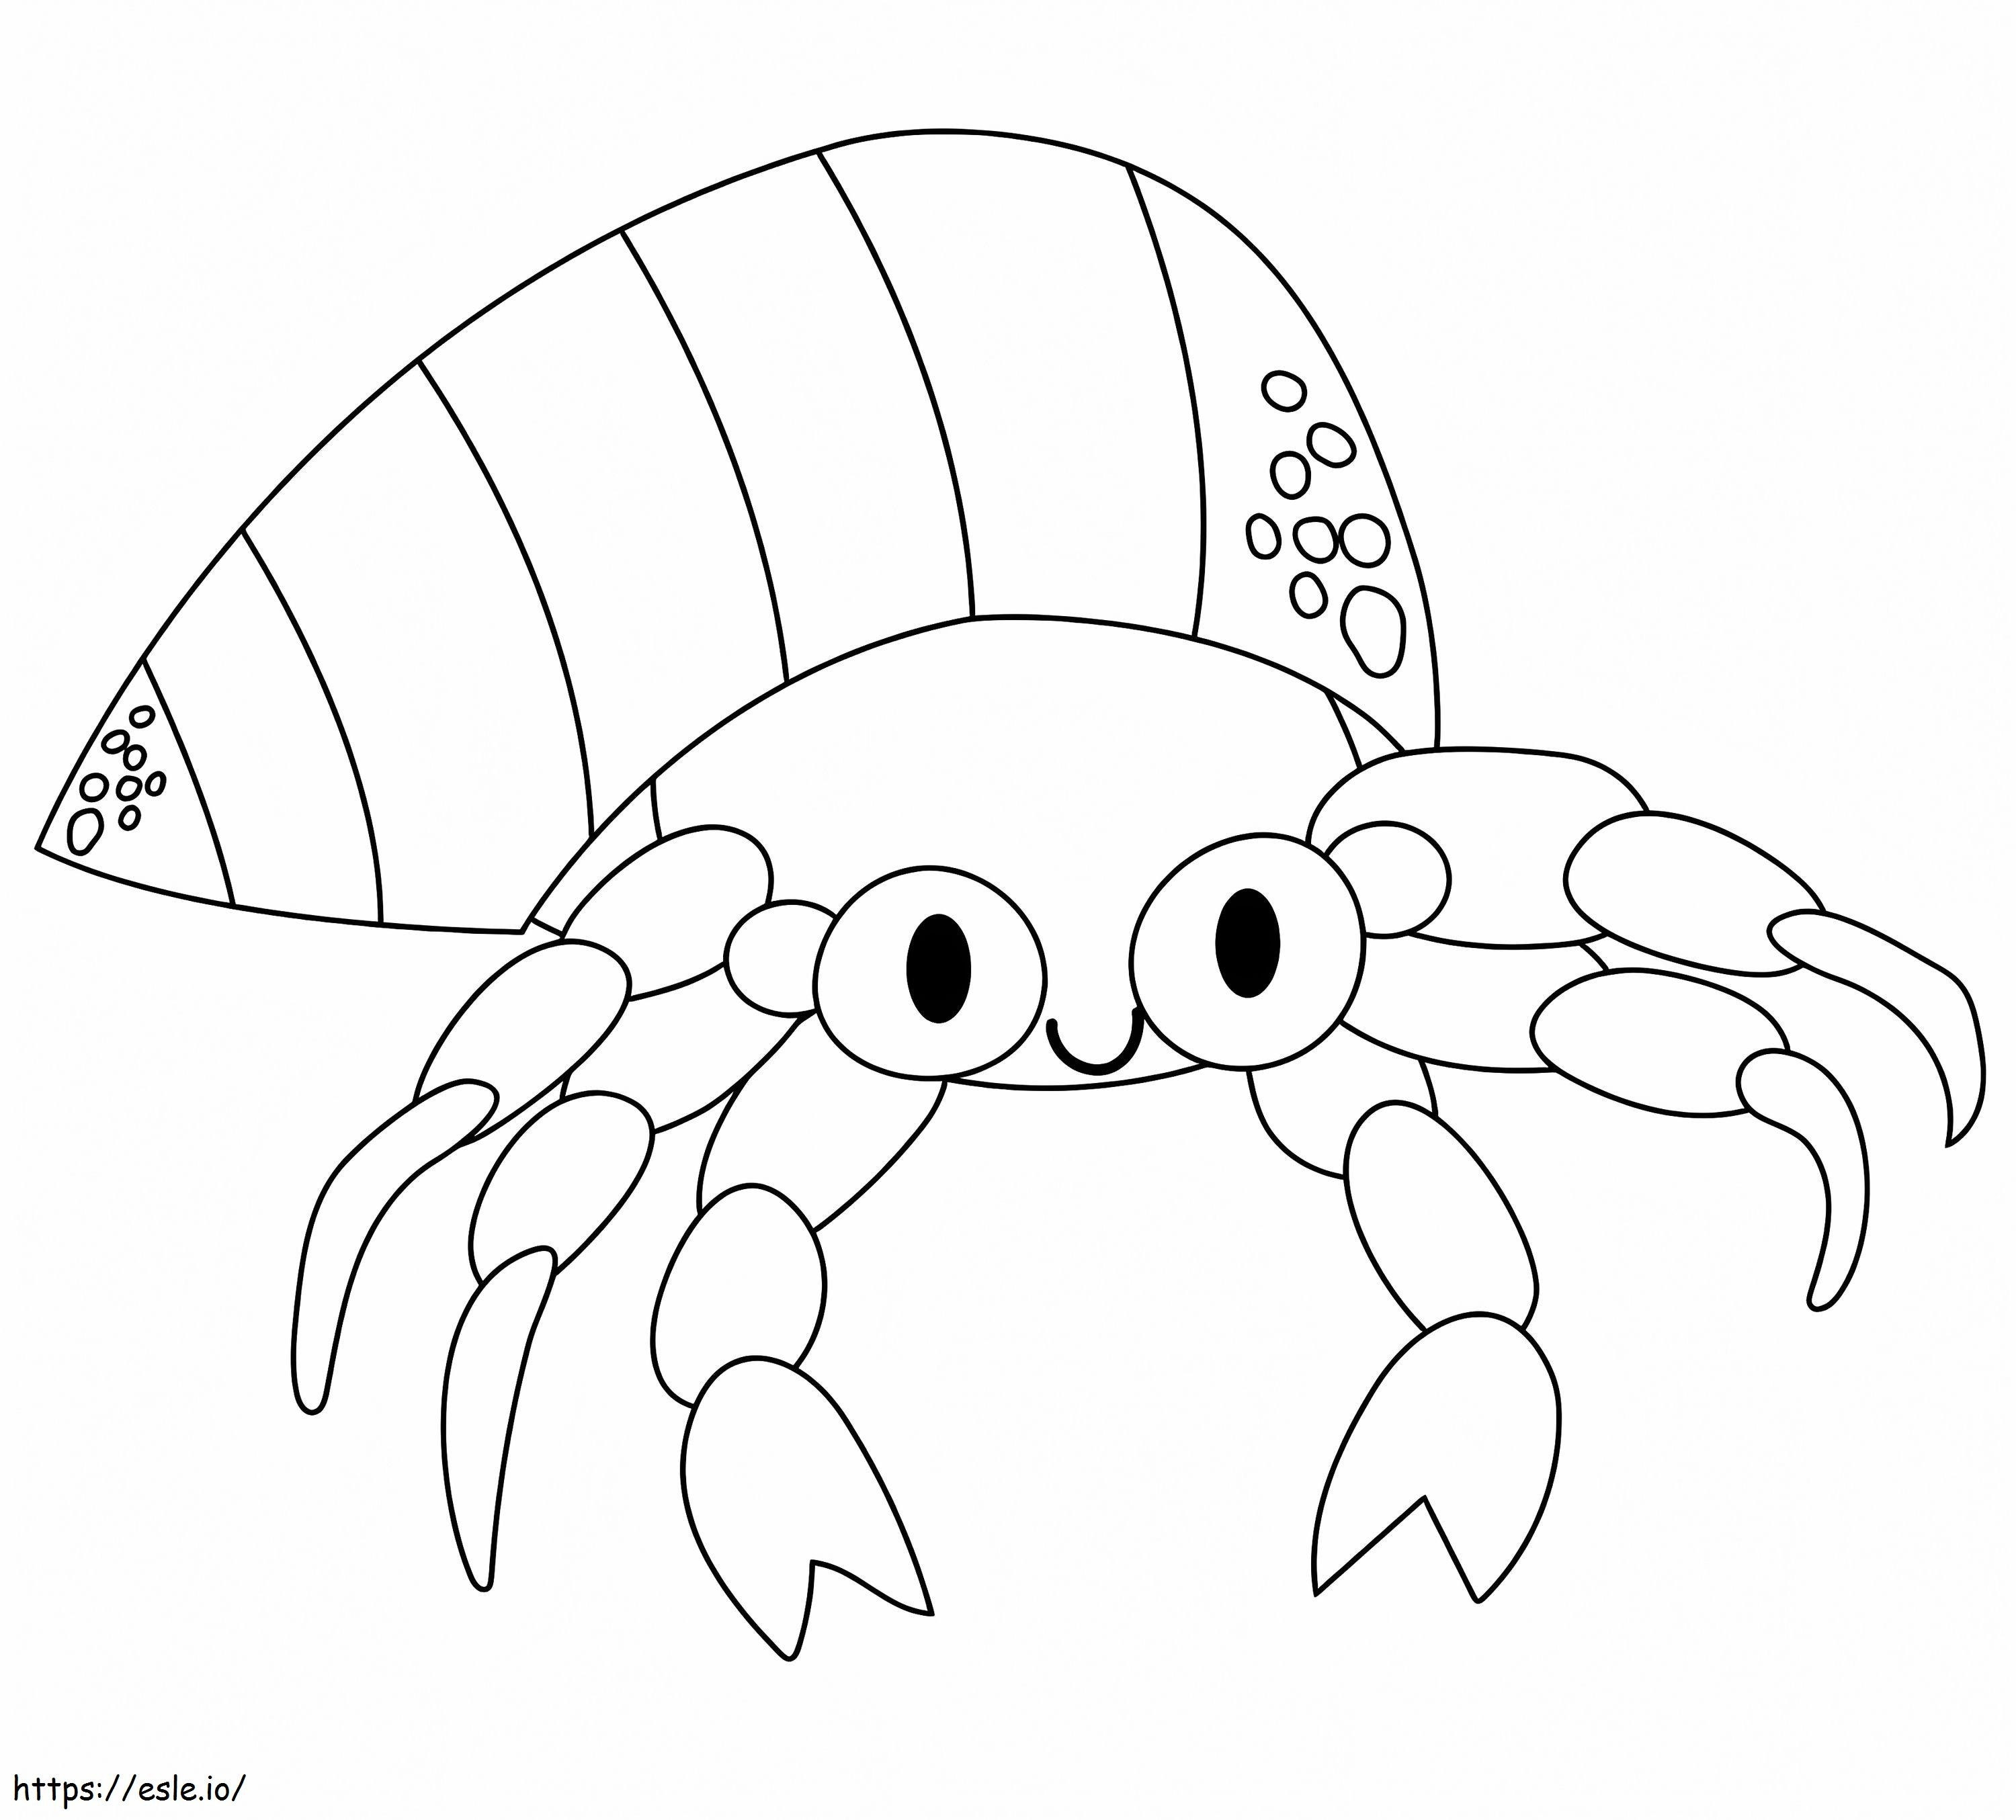 Lovely Hermit Crab coloring page